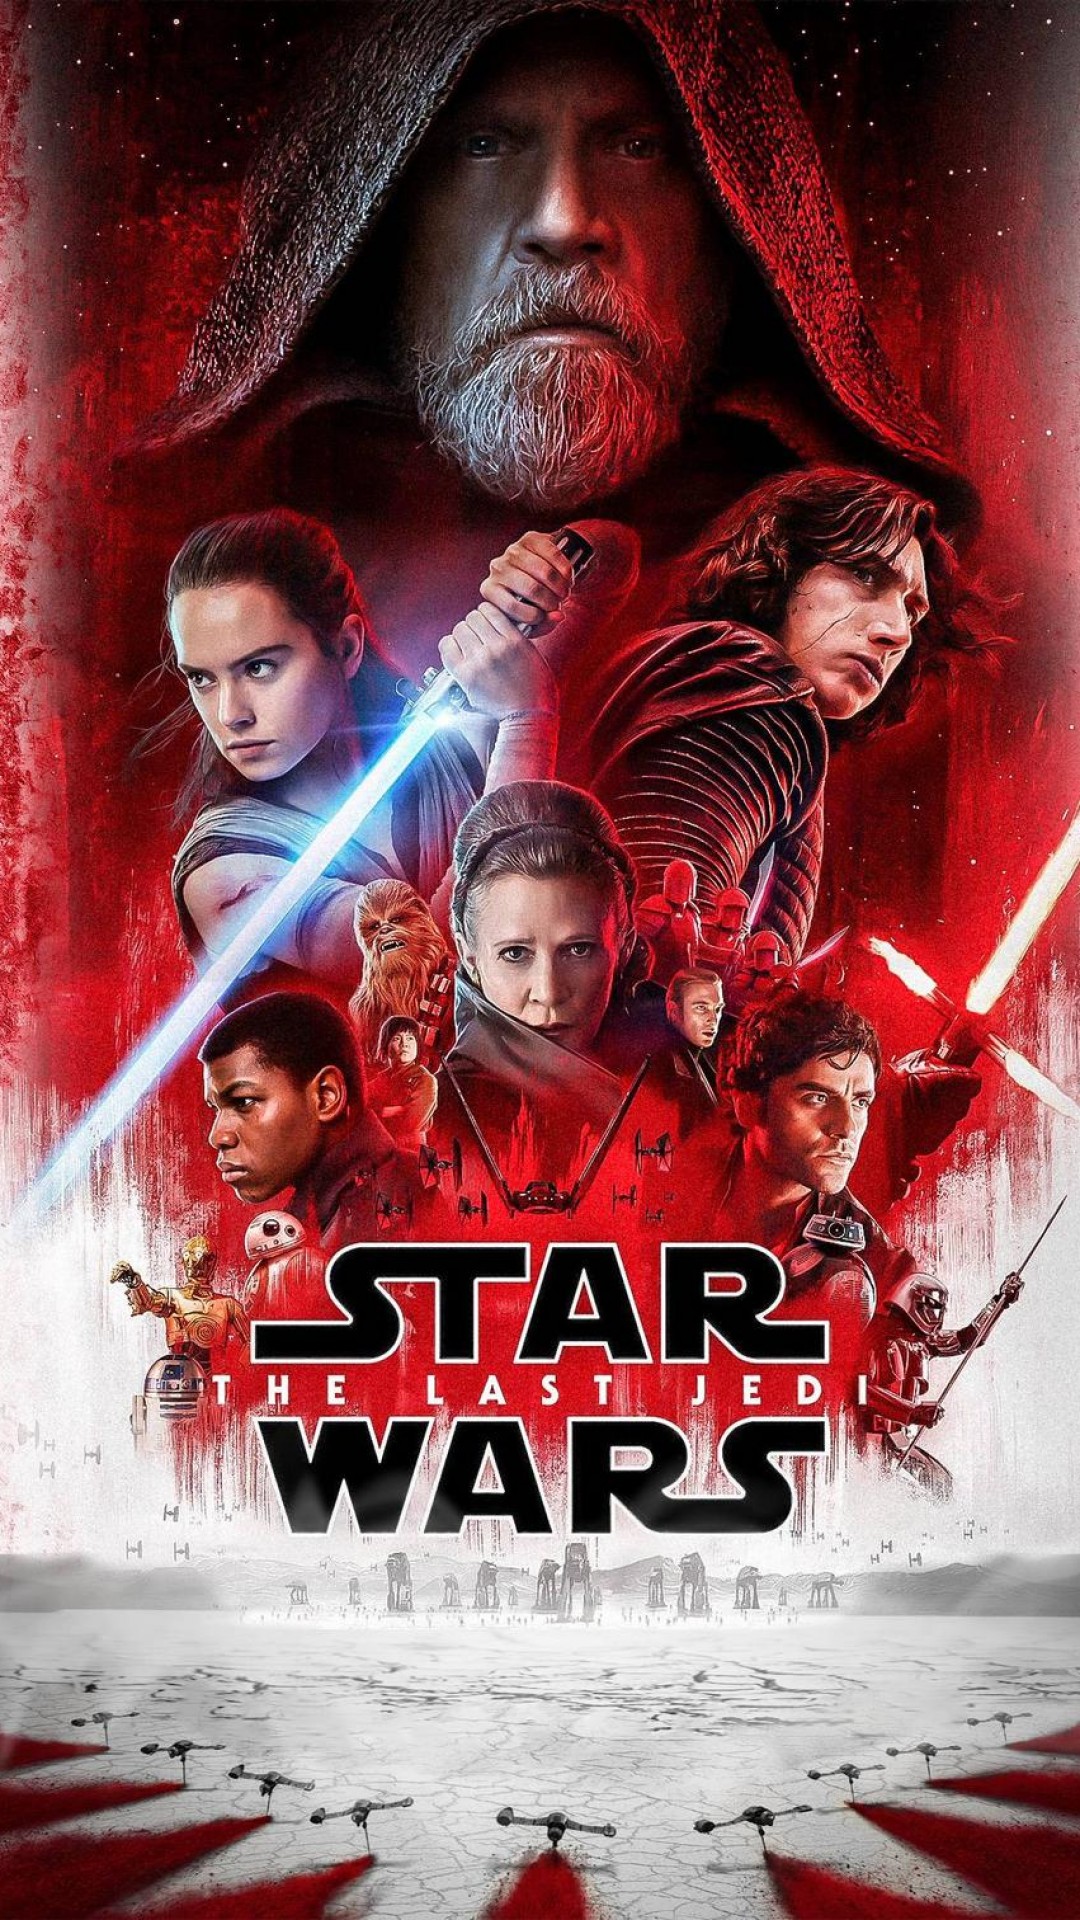 star wars the last jedi wallpaper,movie,poster,action film,hero,fictional character